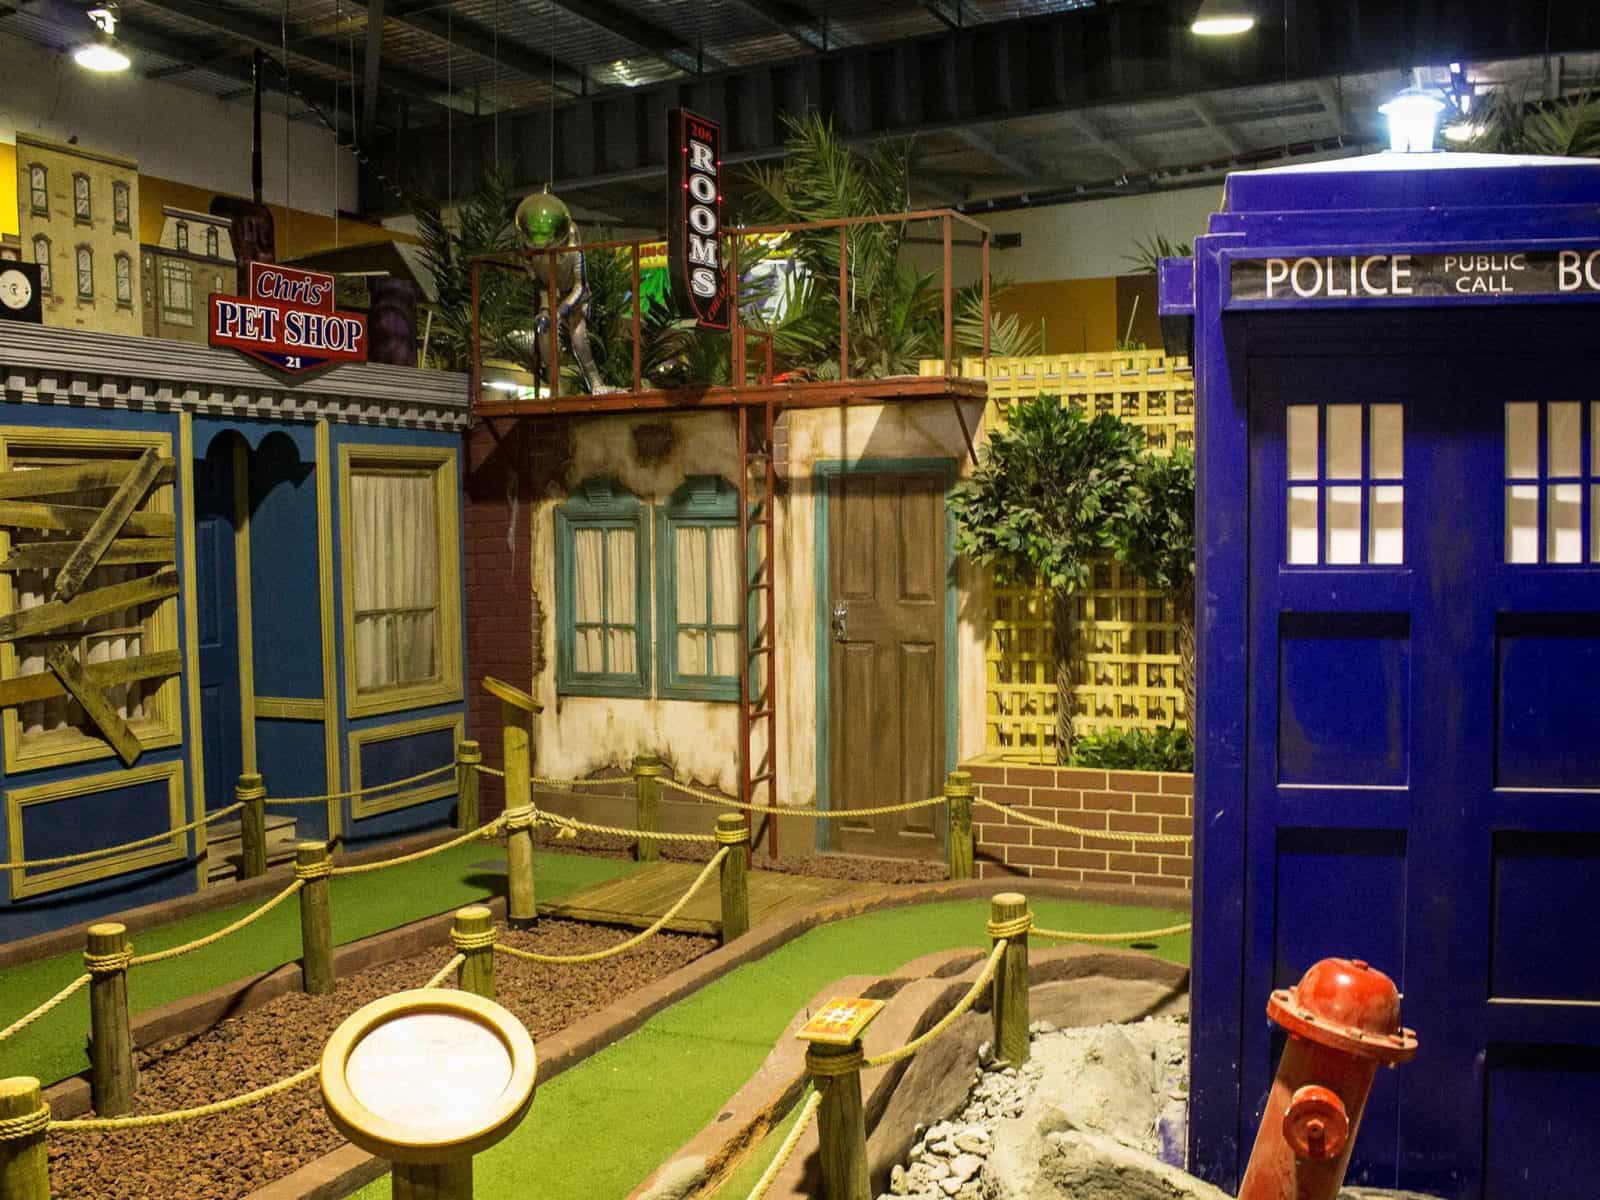 Mini golf course with Tardis in view